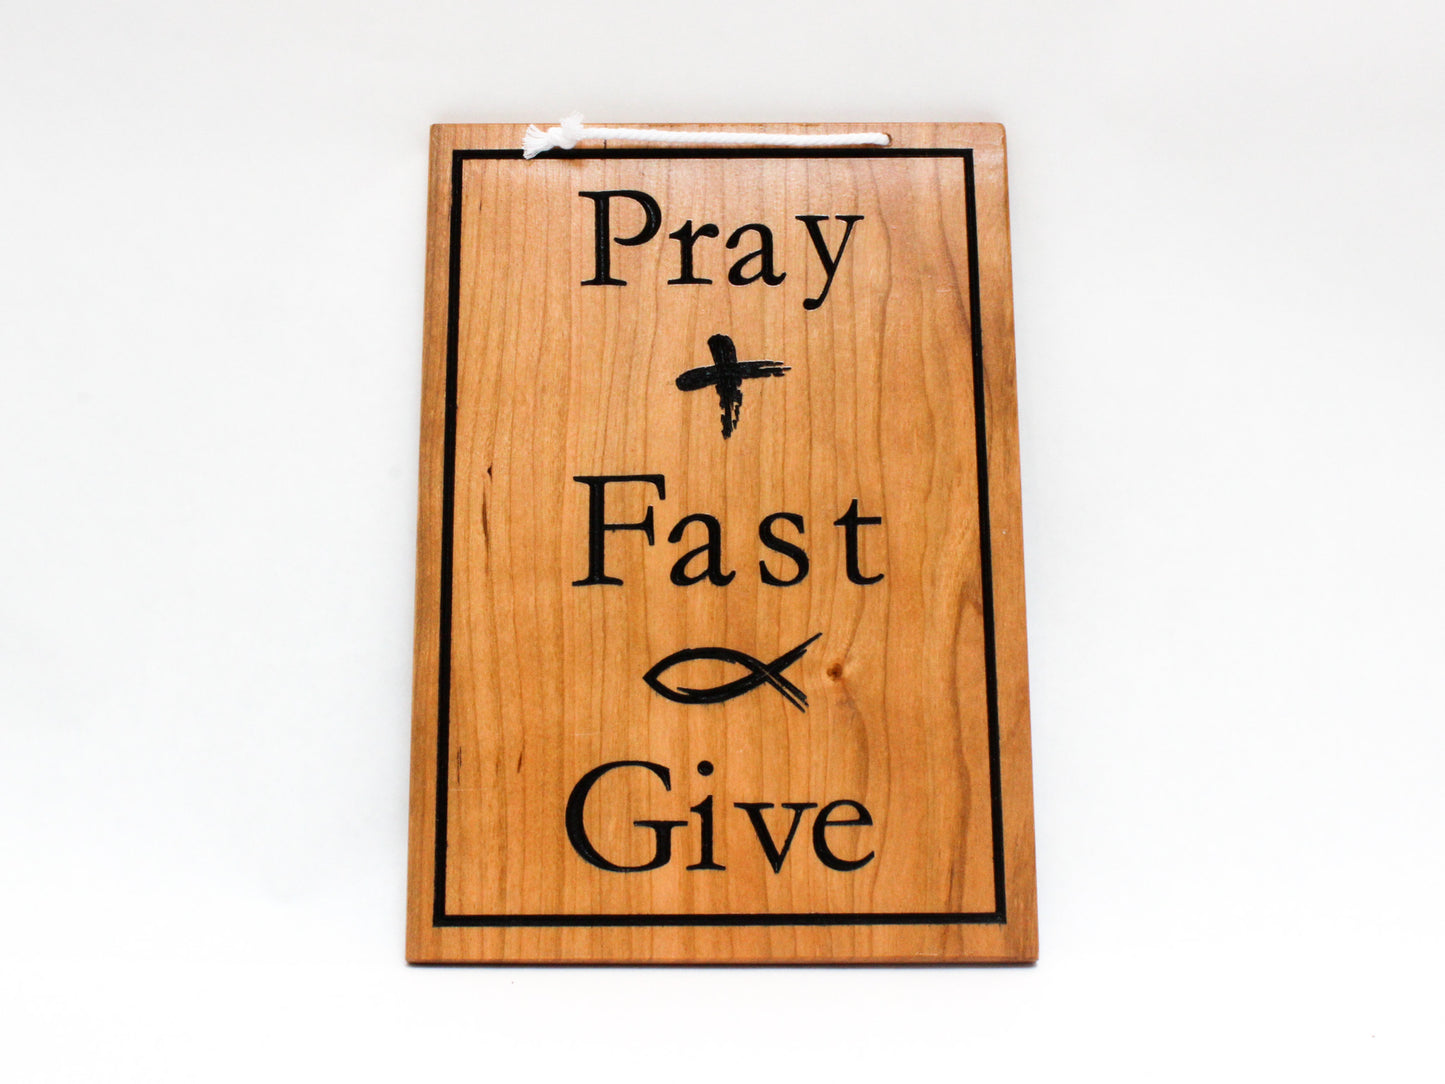 Reversible Lenten hanging sign featuring the text Pray Fast Give with images of the Ash Wednesday cross and the fasting fish. Catholic Lenten decorative sign.